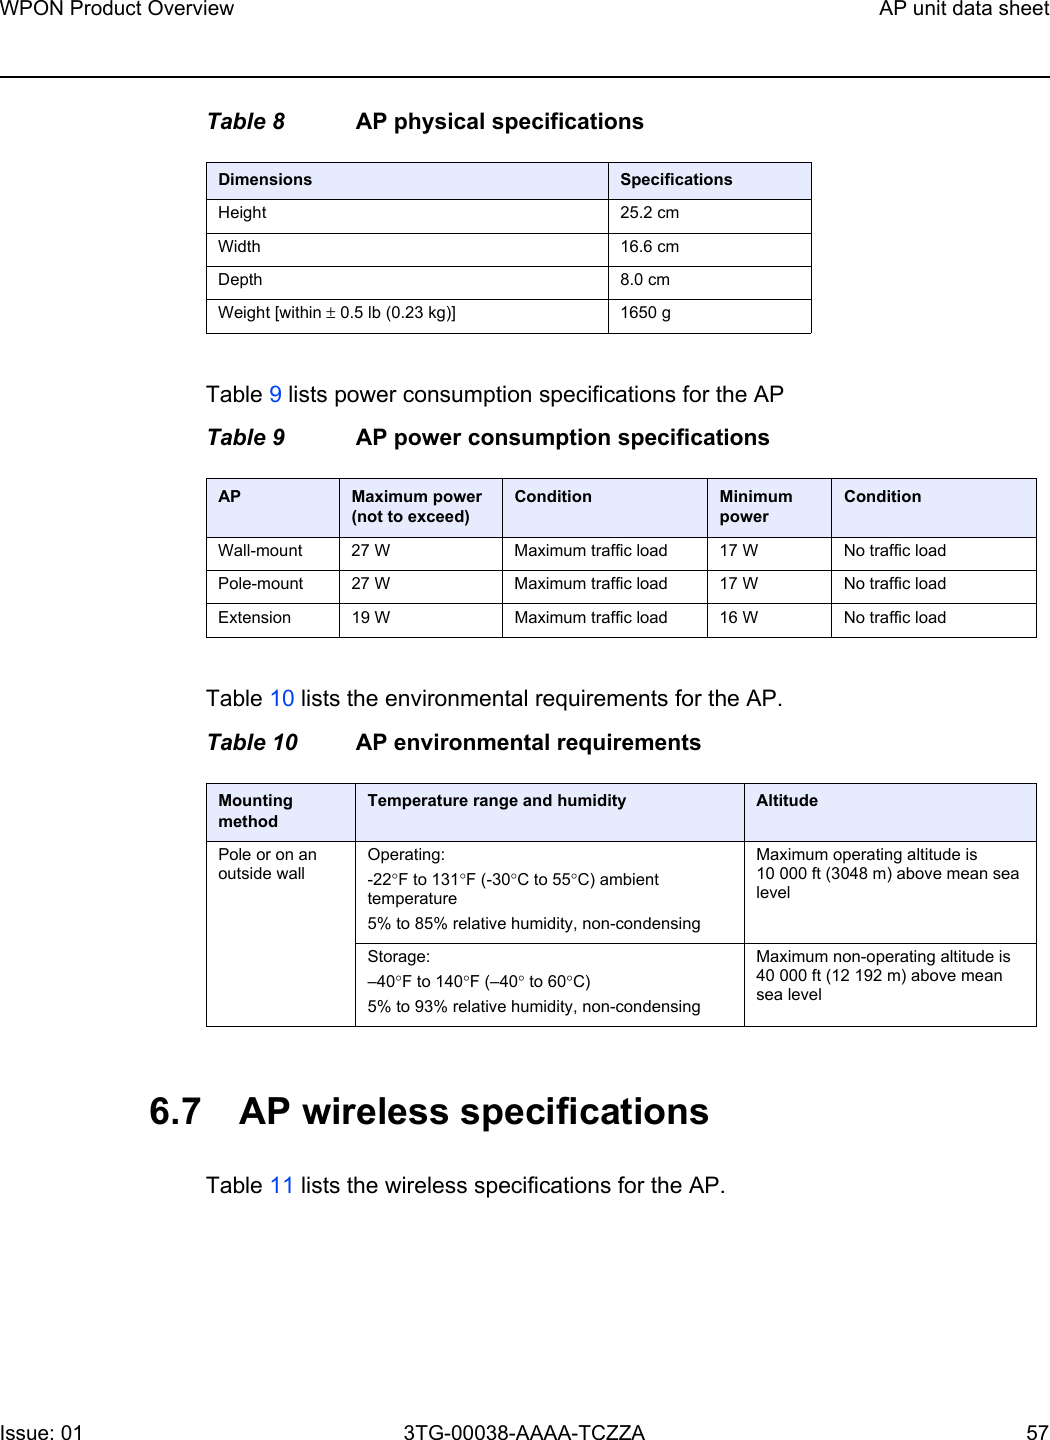 WPON Product Overview AP unit data sheetIssue: 01 3TG-00038-AAAA-TCZZA 57 Table 8 AP physical specificationsTable 9 lists power consumption specifications for the APTable 9 AP power consumption specificationsTable 10 lists the environmental requirements for the AP.Table 10 AP environmental requirements6.7 AP wireless specificationsTable 11 lists the wireless specifications for the AP.Dimensions SpecificationsHeight 25.2 cmWidth 16.6 cmDepth 8.0 cmWeight [within ± 0.5 lb (0.23 kg)] 1650 gAP Maximum power (not to exceed)Condition Minimum powerConditionWall-mount 27 W Maximum traffic load 17 W No traffic loadPole-mount 27 W Maximum traffic load 17 W No traffic loadExtension 19 W Maximum traffic load 16 W No traffic loadMounting methodTemperature range and humidity AltitudePole or on an outside wallOperating:-22°F to 131°F (-30°C to 55°C) ambient temperature5% to 85% relative humidity, non-condensingMaximum operating altitude is 10 000 ft (3048 m) above mean sea levelStorage:–40°F to 140°F (–40° to 60°C) 5% to 93% relative humidity, non-condensingMaximum non-operating altitude is 40 000 ft (12 192 m) above mean sea level 